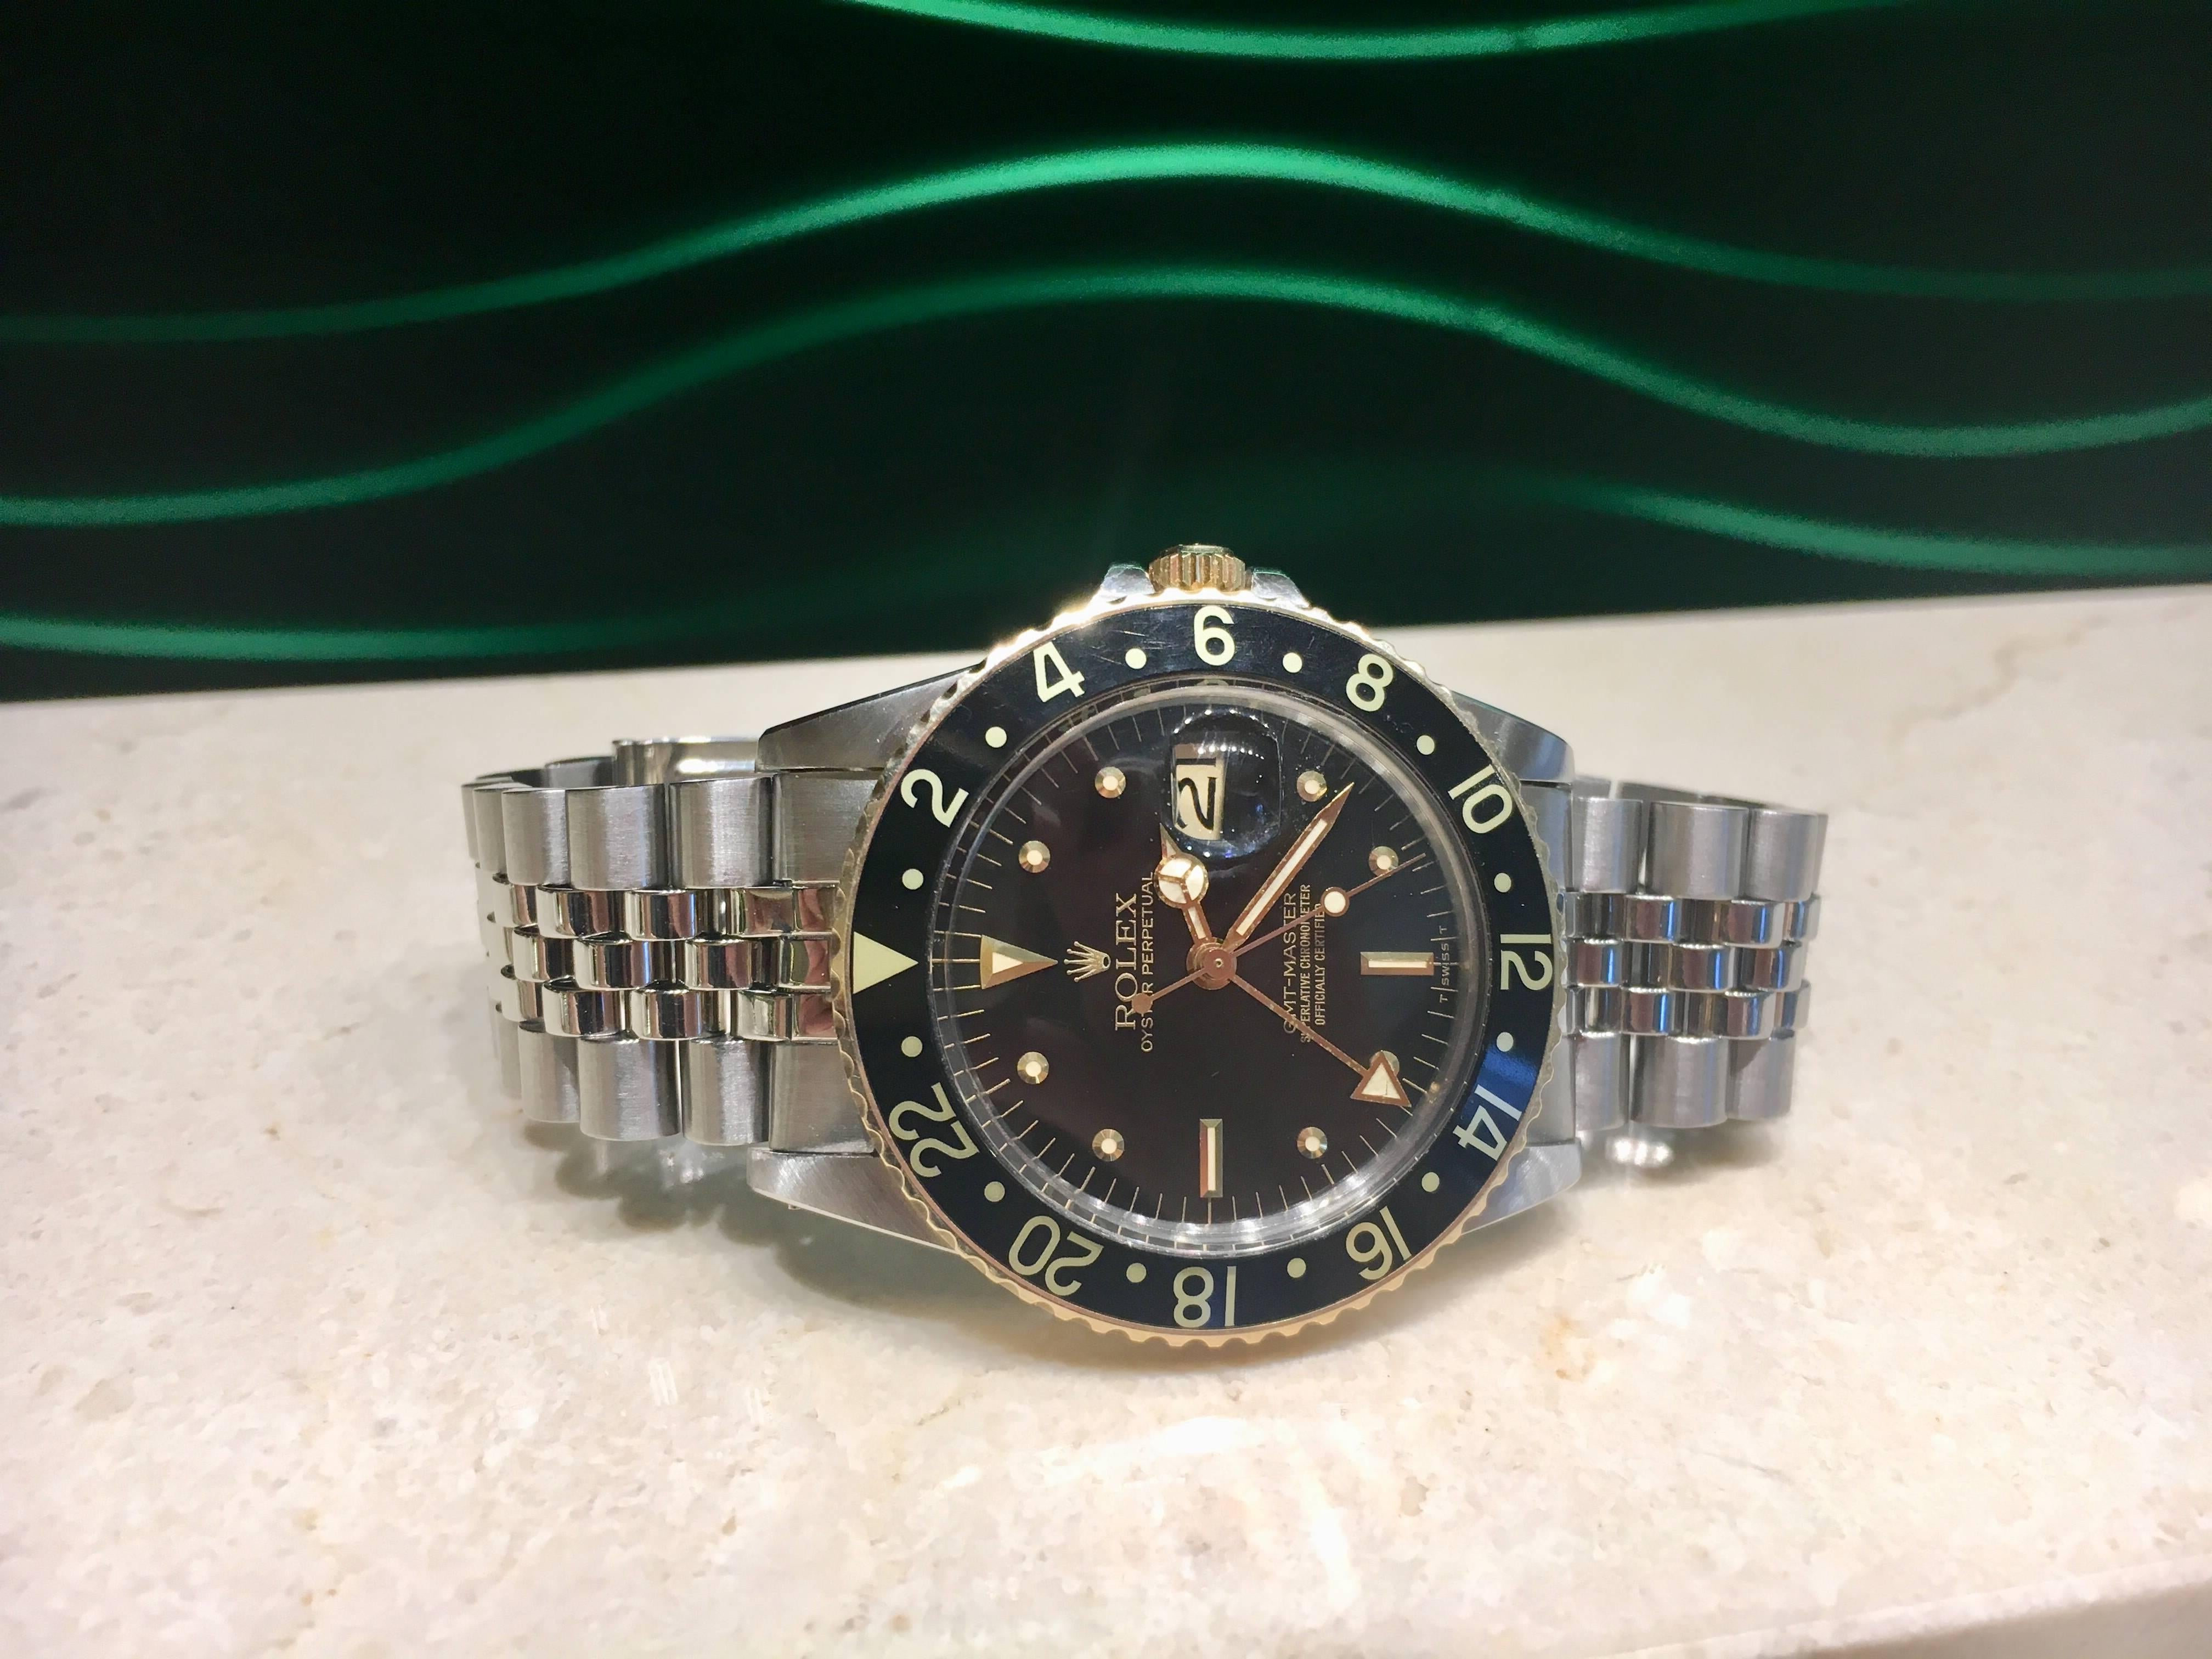 One Estate Rolex GMT timepiece, black dial, 40 mm with date, Model # 16753, Serial # 63376_ _ , 24 links including end pieces, circa 1980. Comes with Rolex box as pictured. 